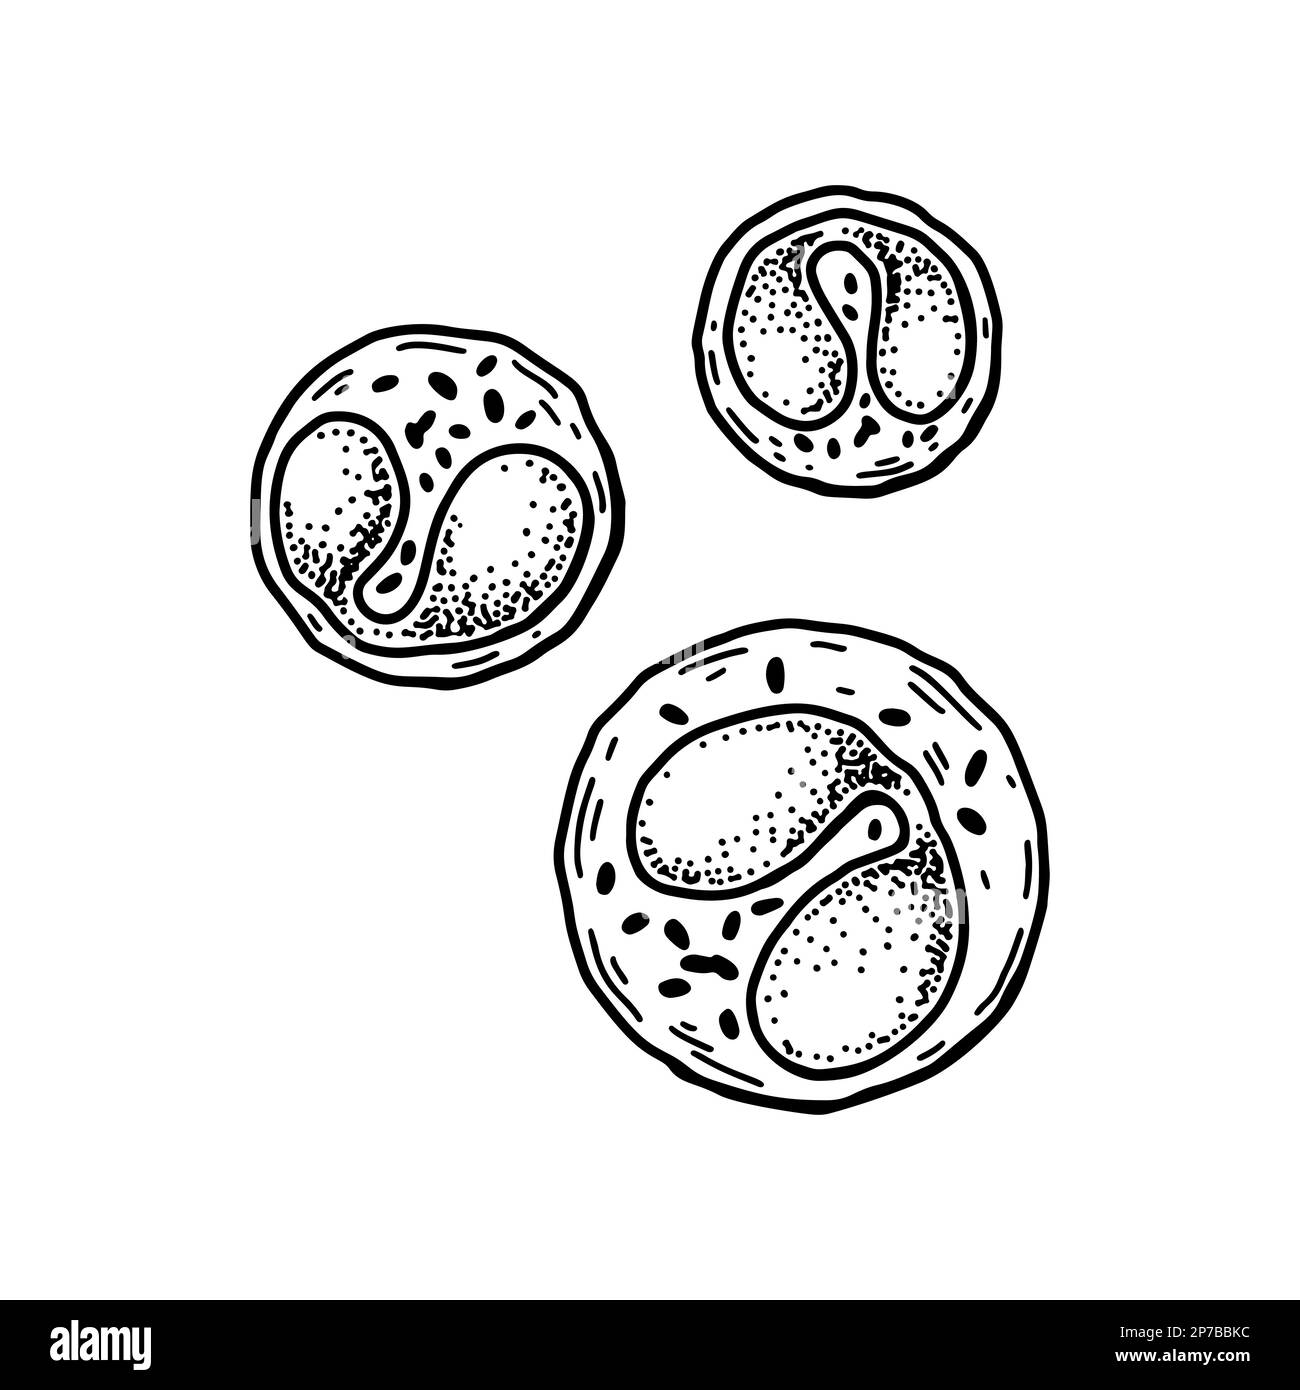 Eosinophil leukocyte white blood cells isolated on white background. Hand drawn scientific microbiology vector illustration in sketch style Stock Vector